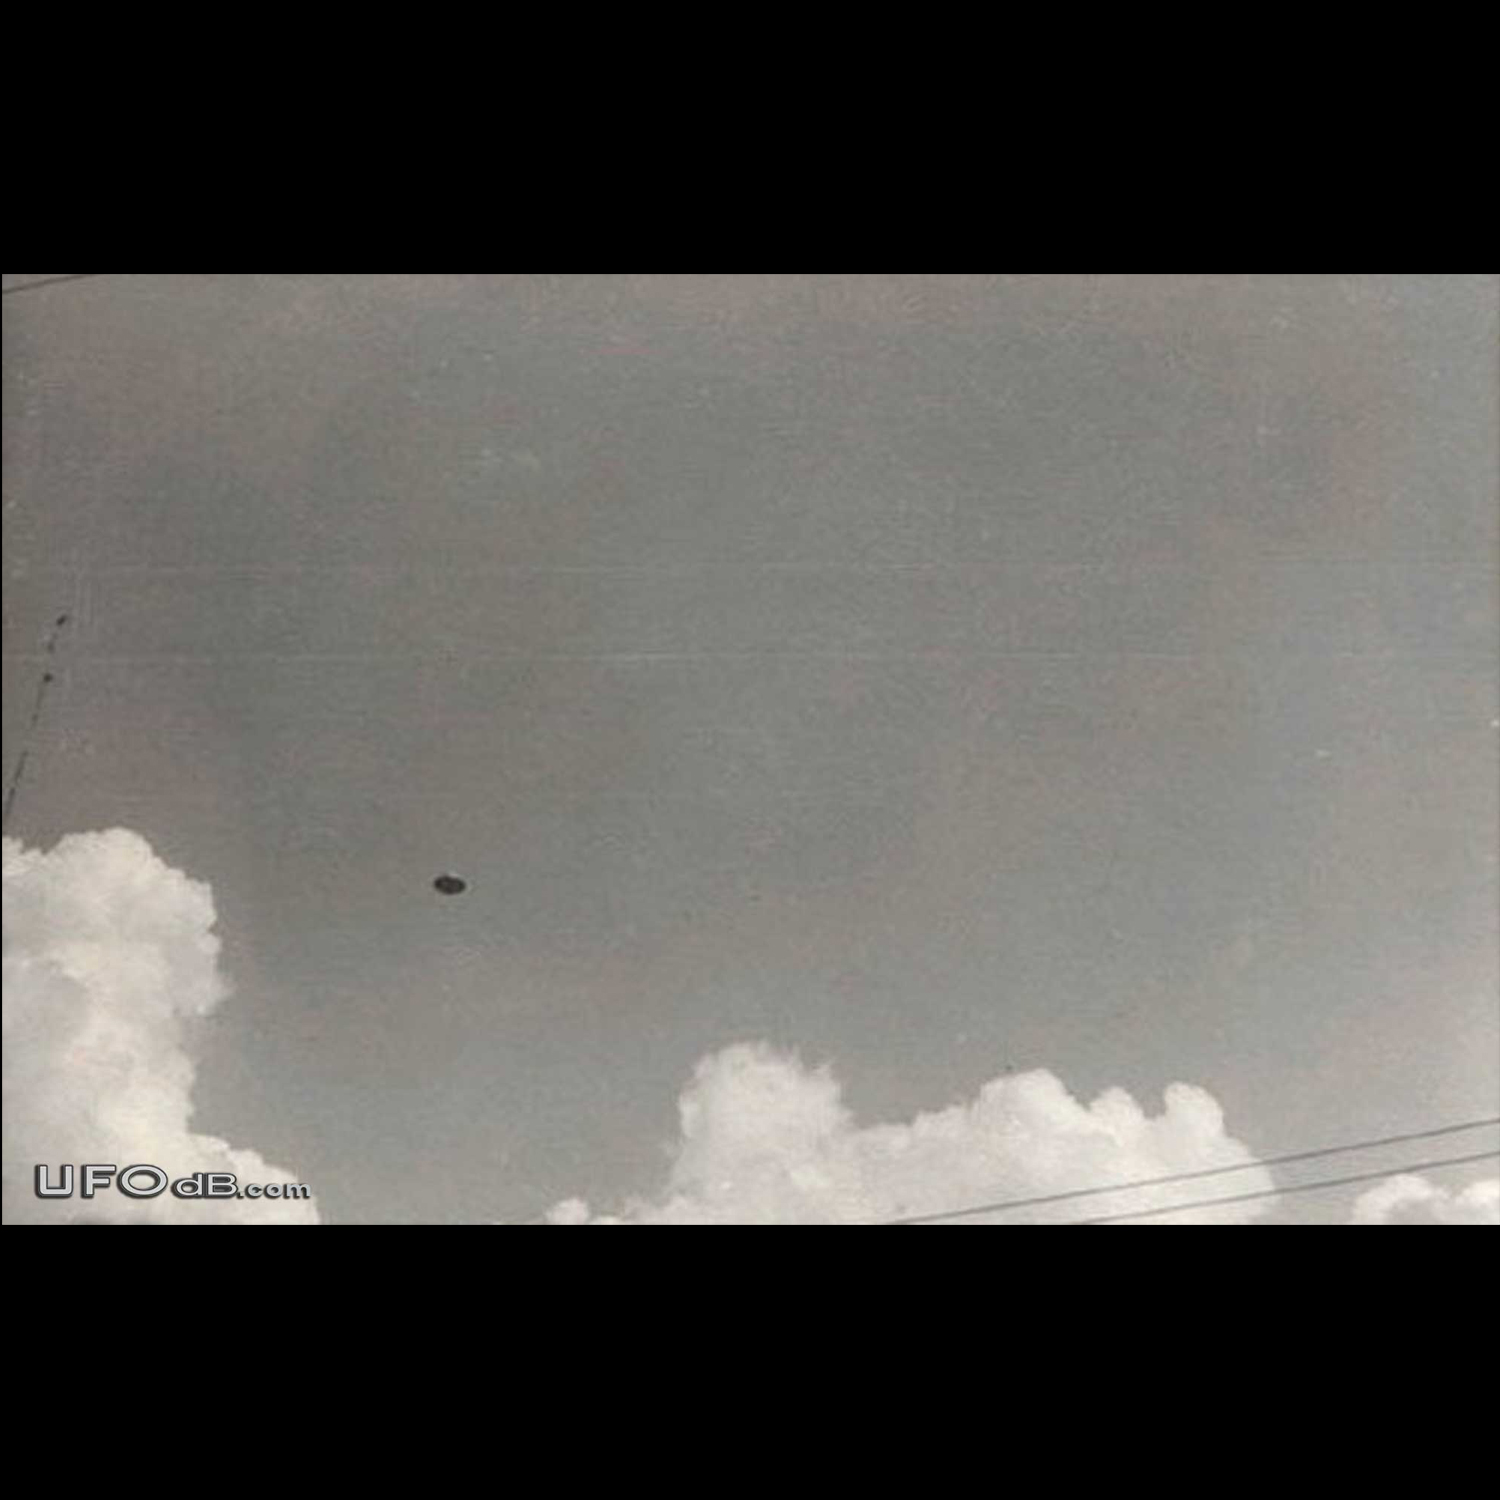 Old Grey 1956 Saucer UFO picture from Rio de Janeiro Brazil UFO Picture #370-1